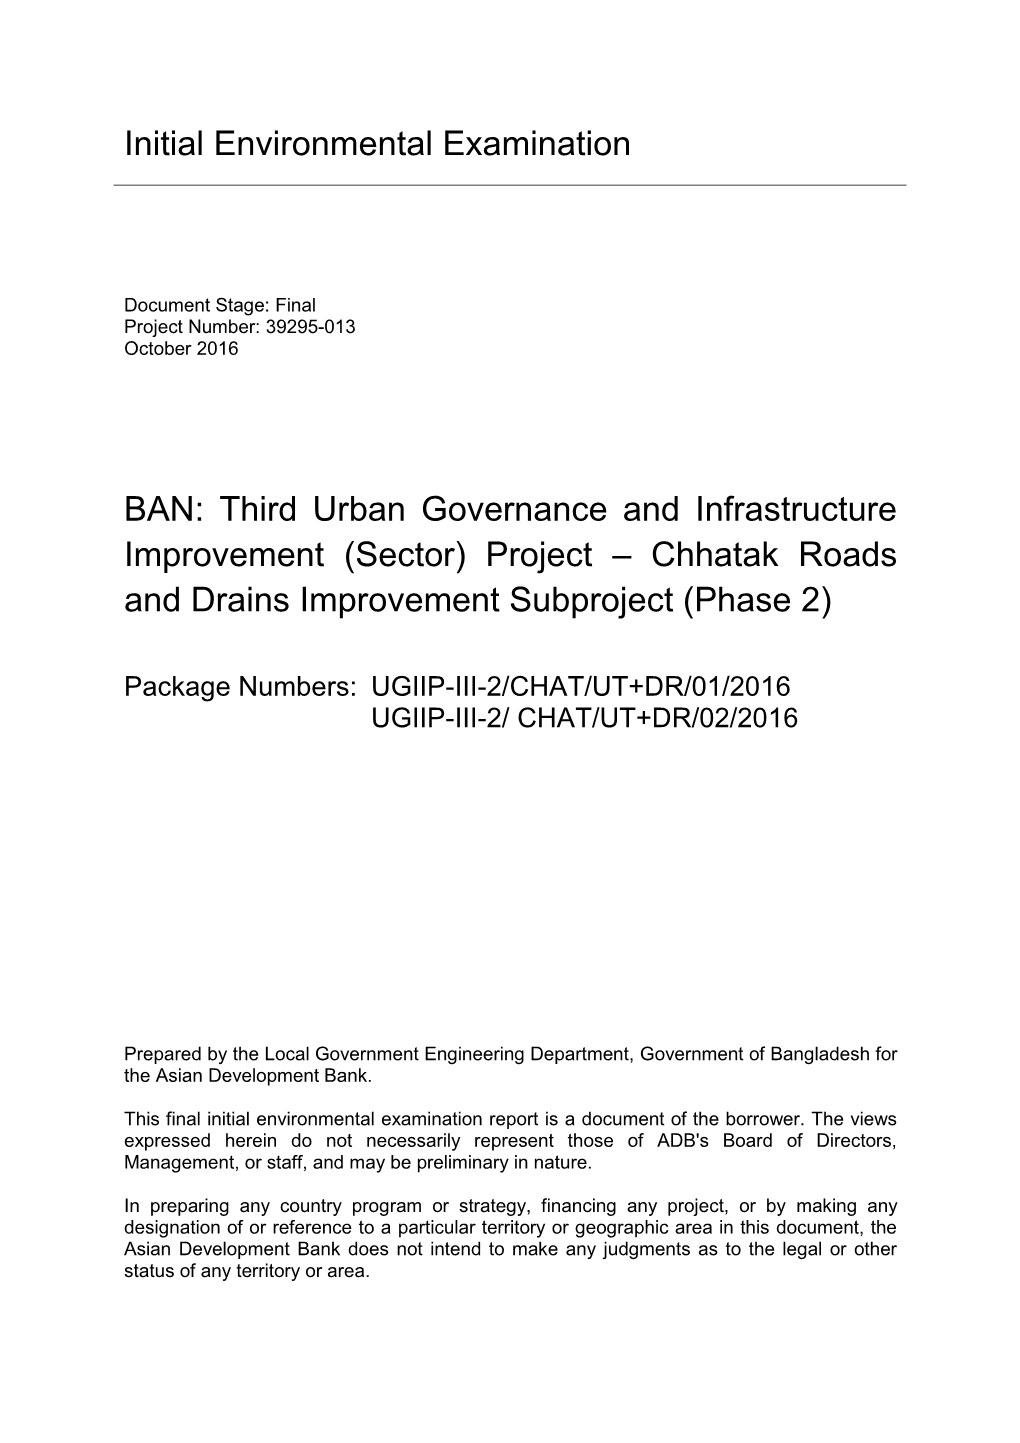 Sector) Project – Chhatak Roads and Drains Improvement Subproject (Phase 2